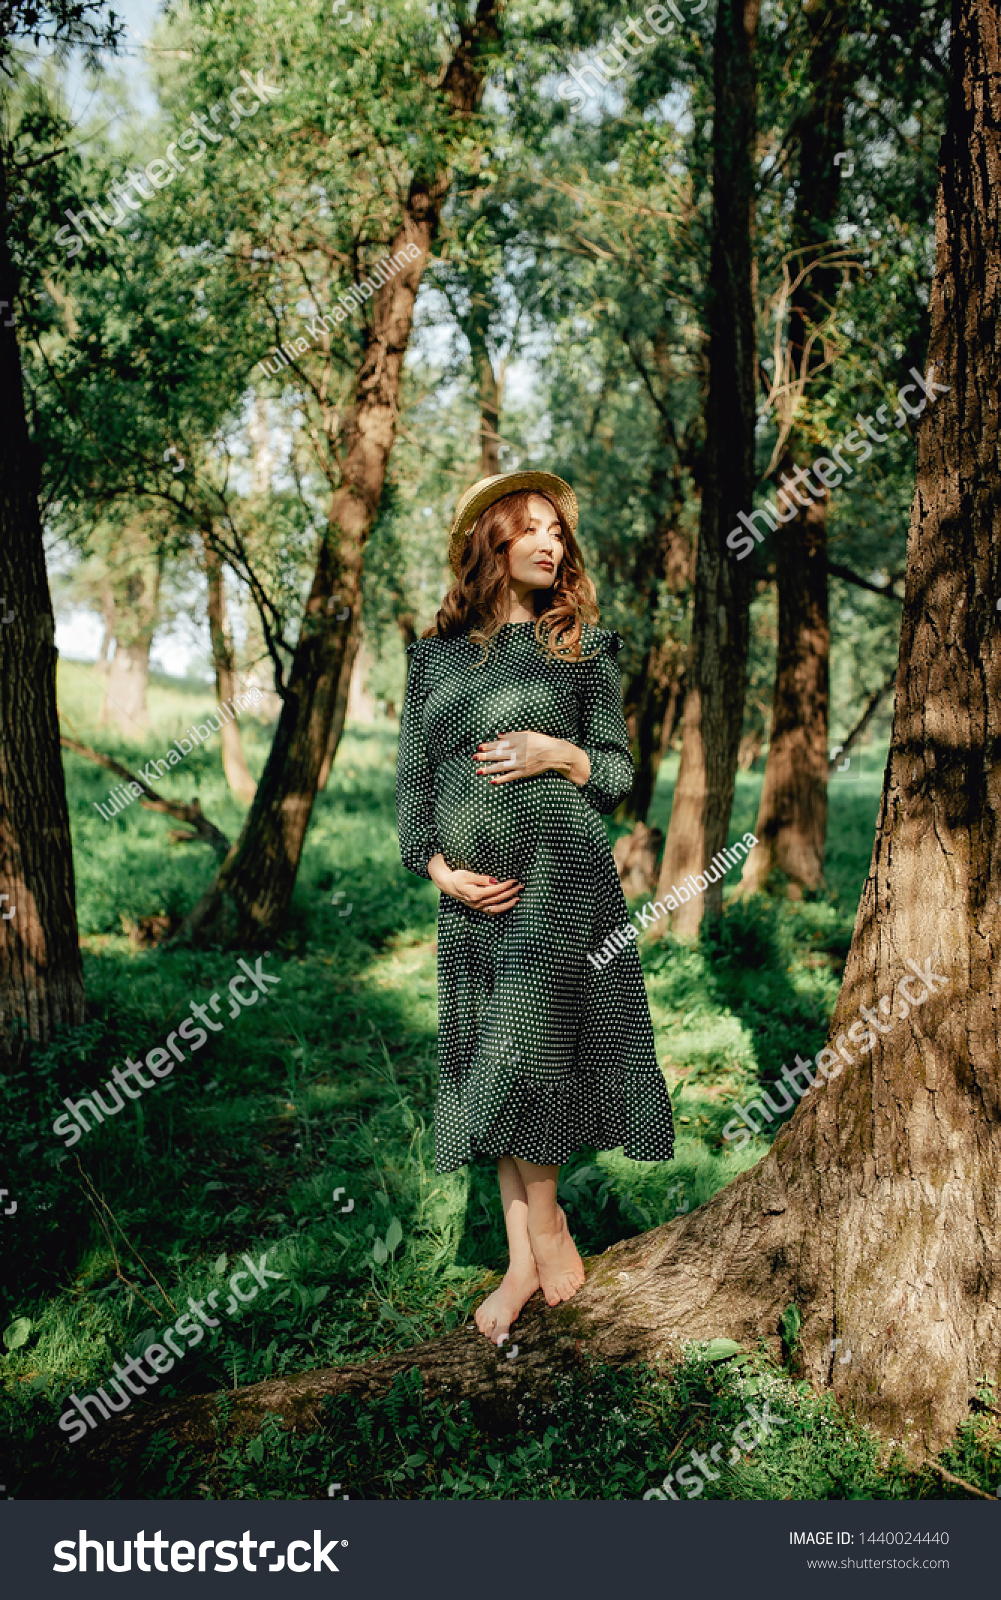 https://image.shutterstock.com/shutterstock/photos/1440024440/display_1500/stock-photo-smiling-pretty-pregnant-woman-touching-around-the-abdomen-against-greenery-background-wearing-1440024440.jpg